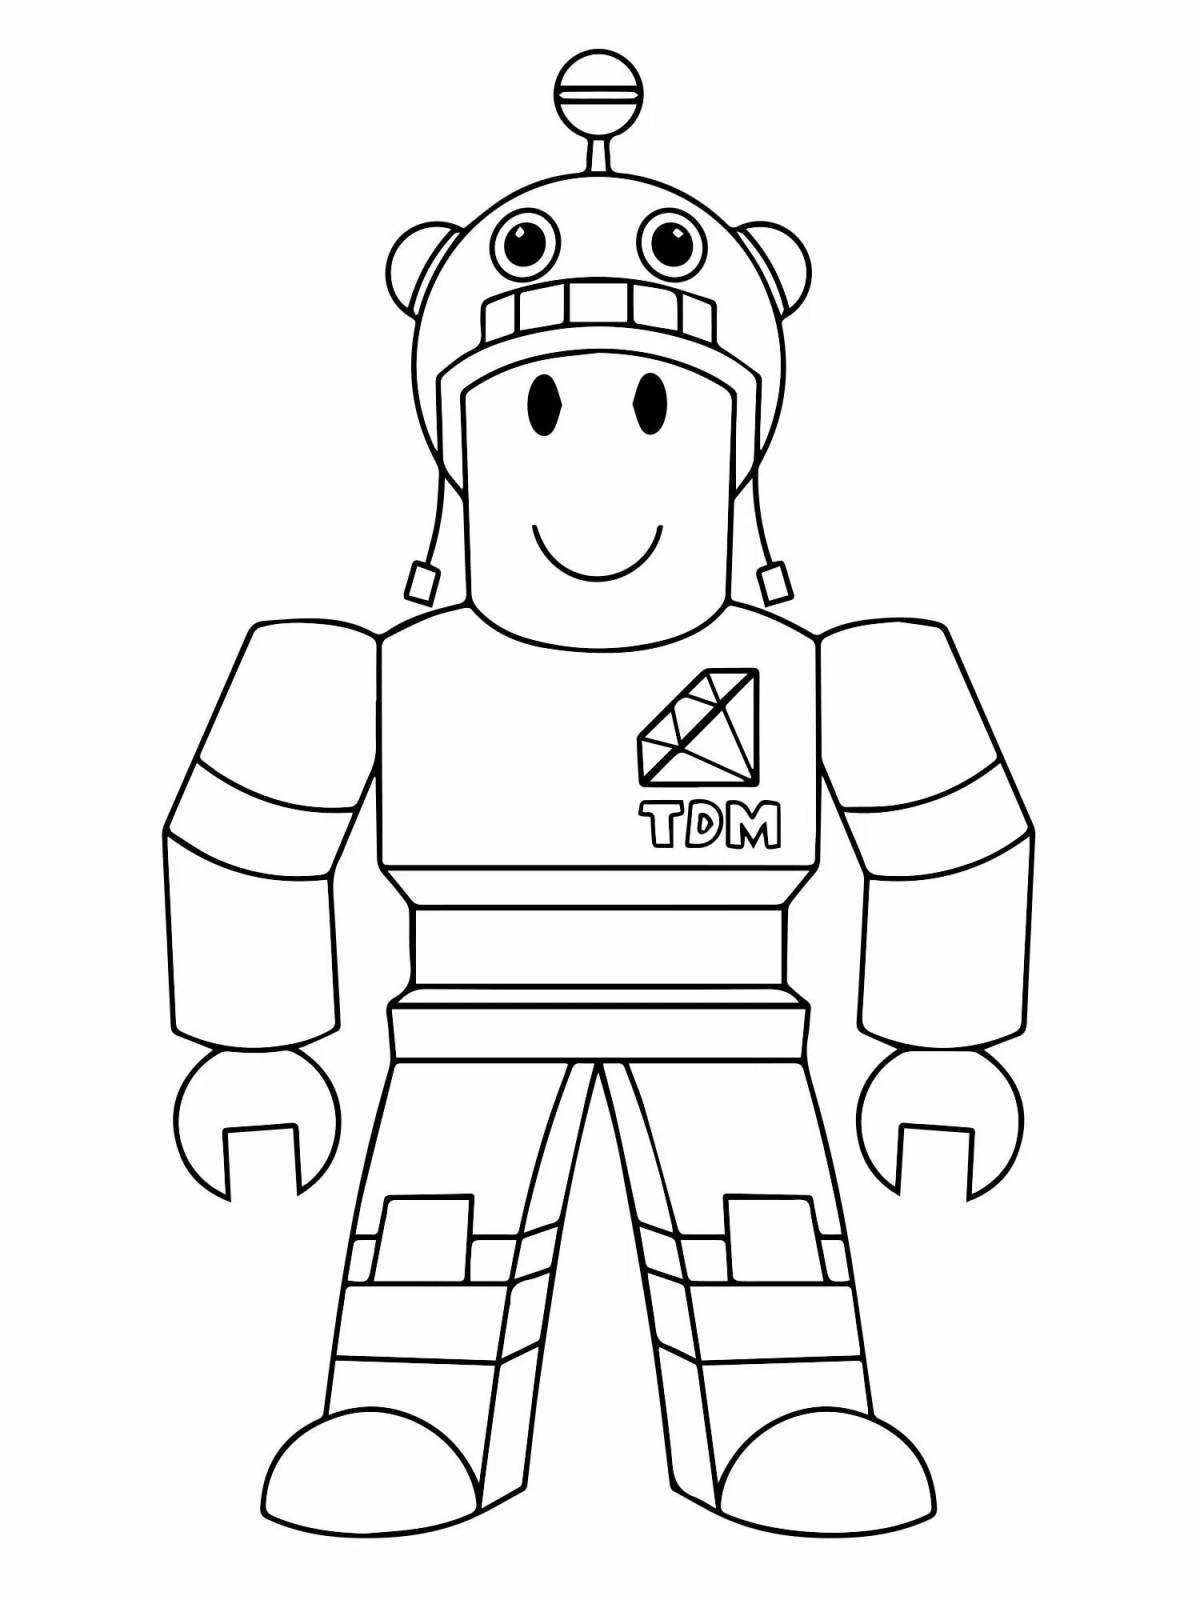 Roblox rainbow friends fun coloring for boys